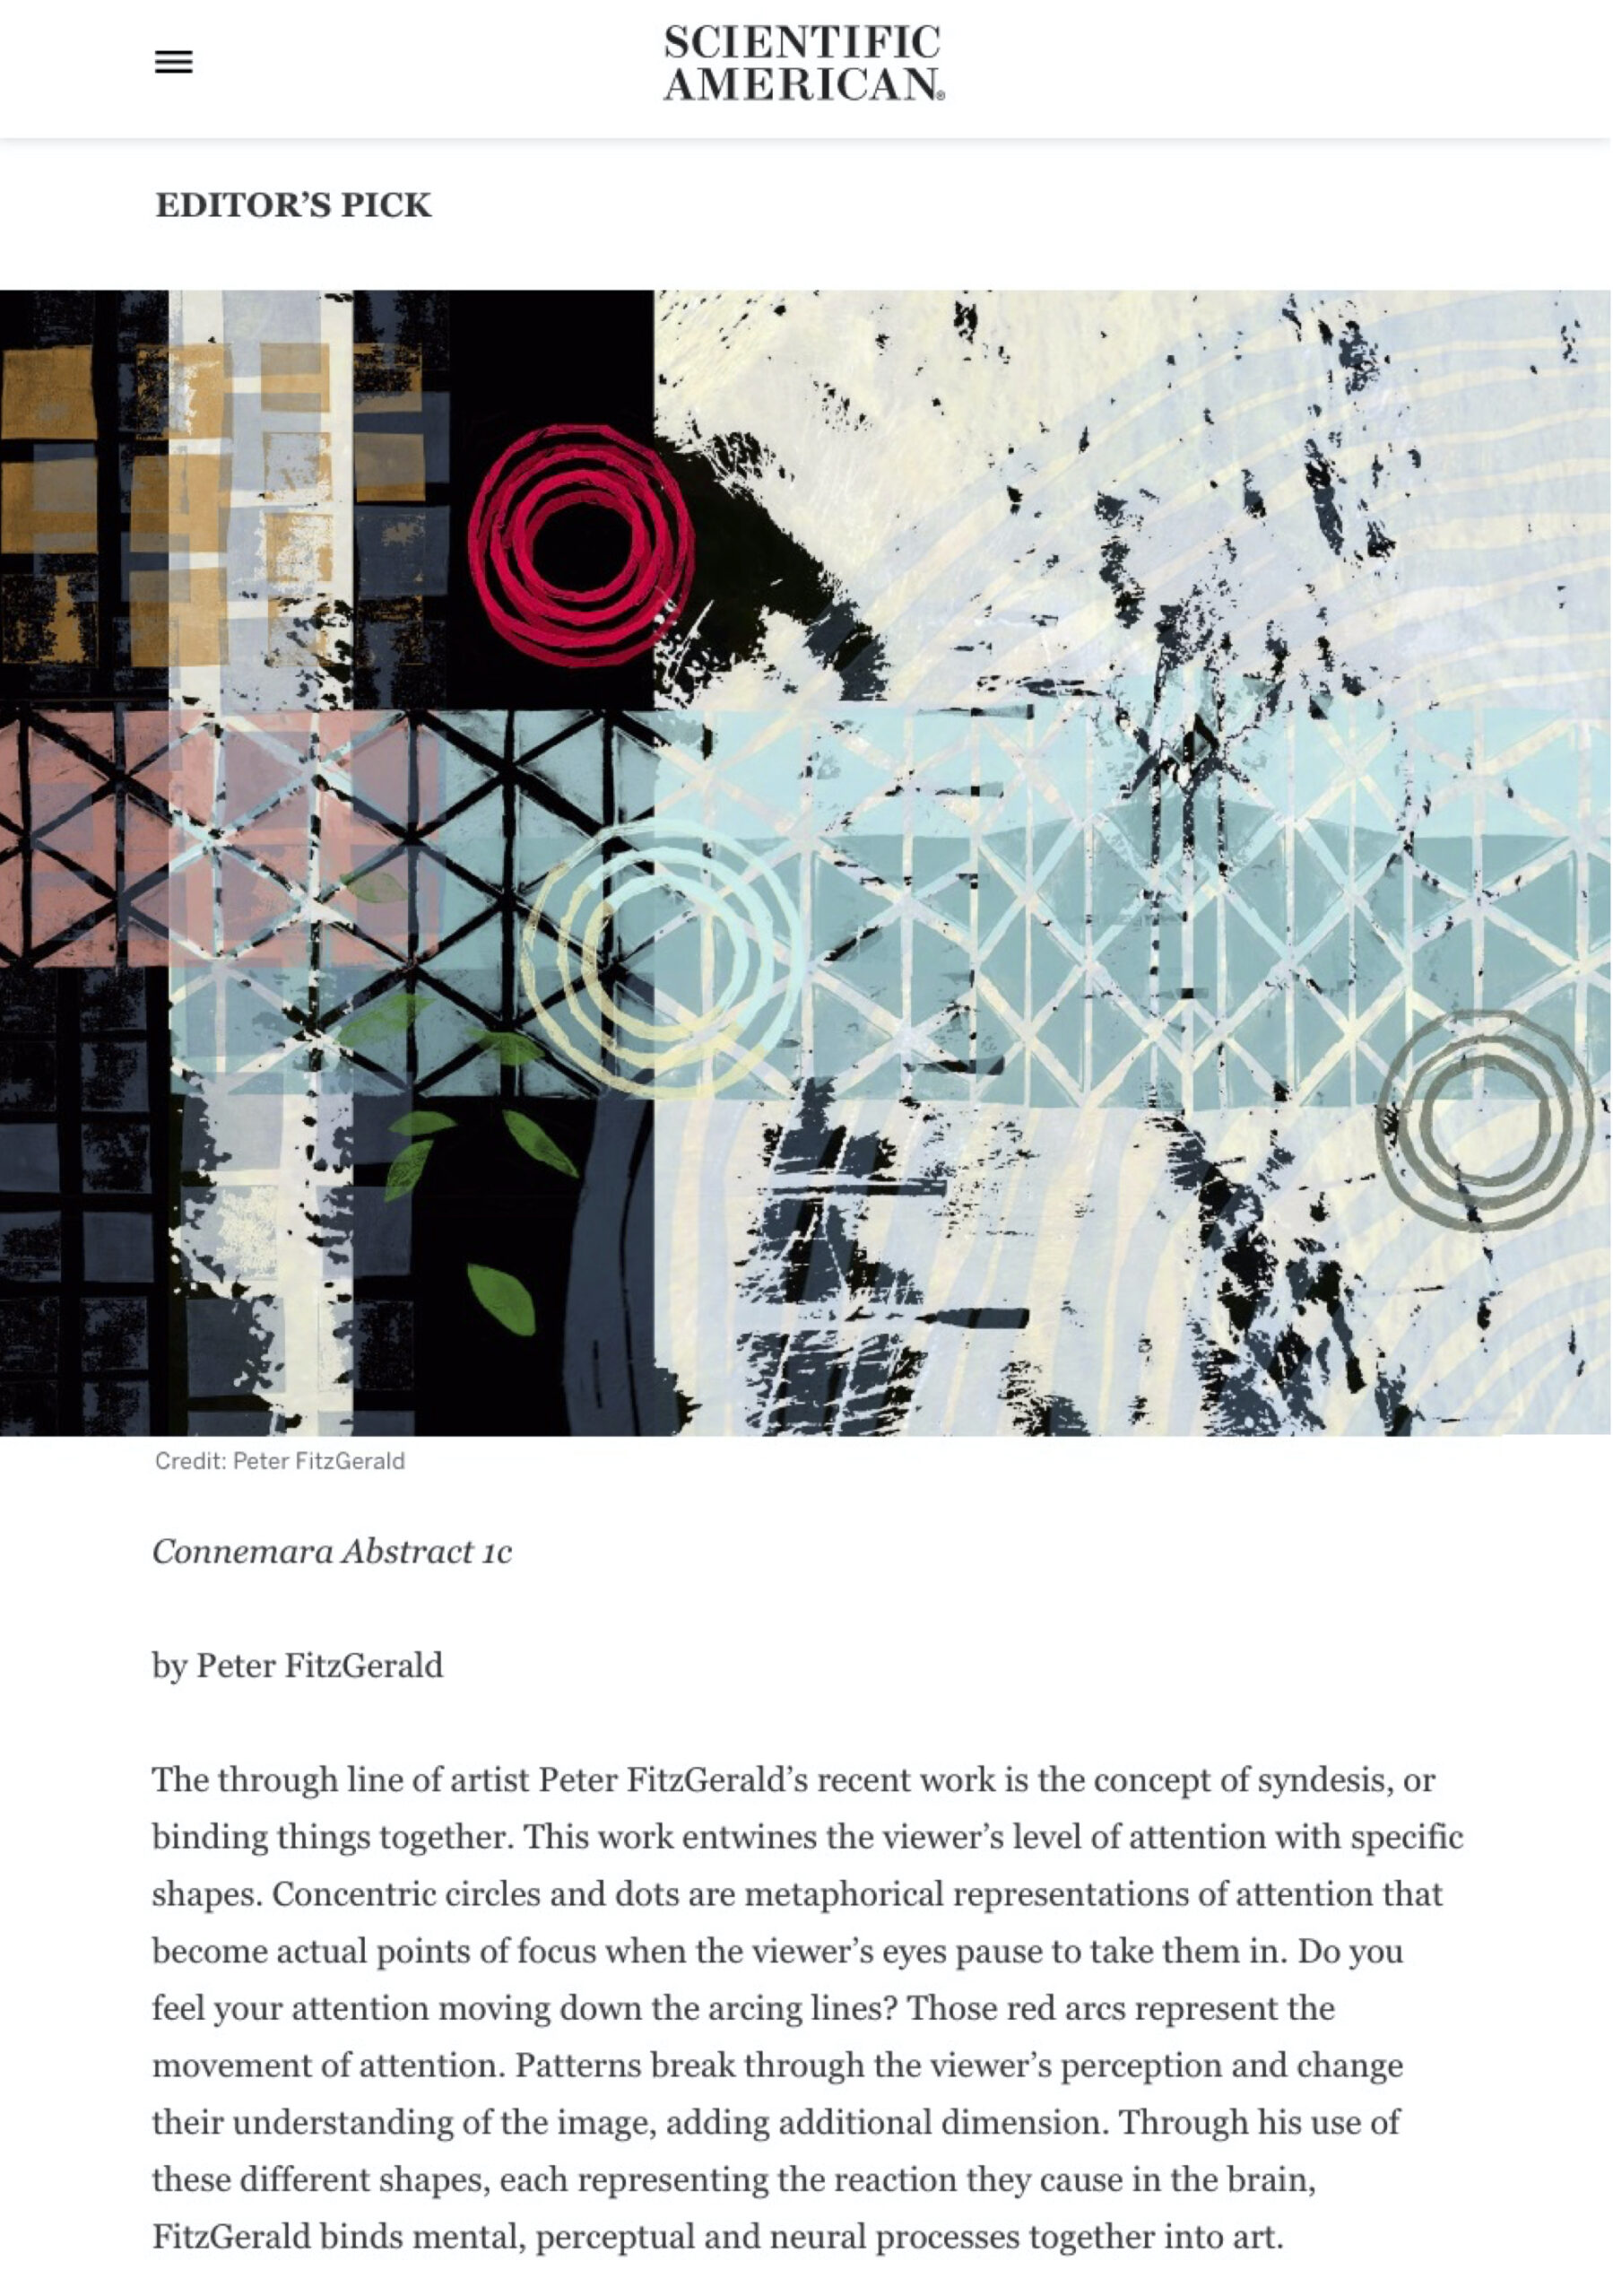 Reproduction of Peter FitzGerald: ‘Connemara Abstract 1c’ on Scientific American website, 2023